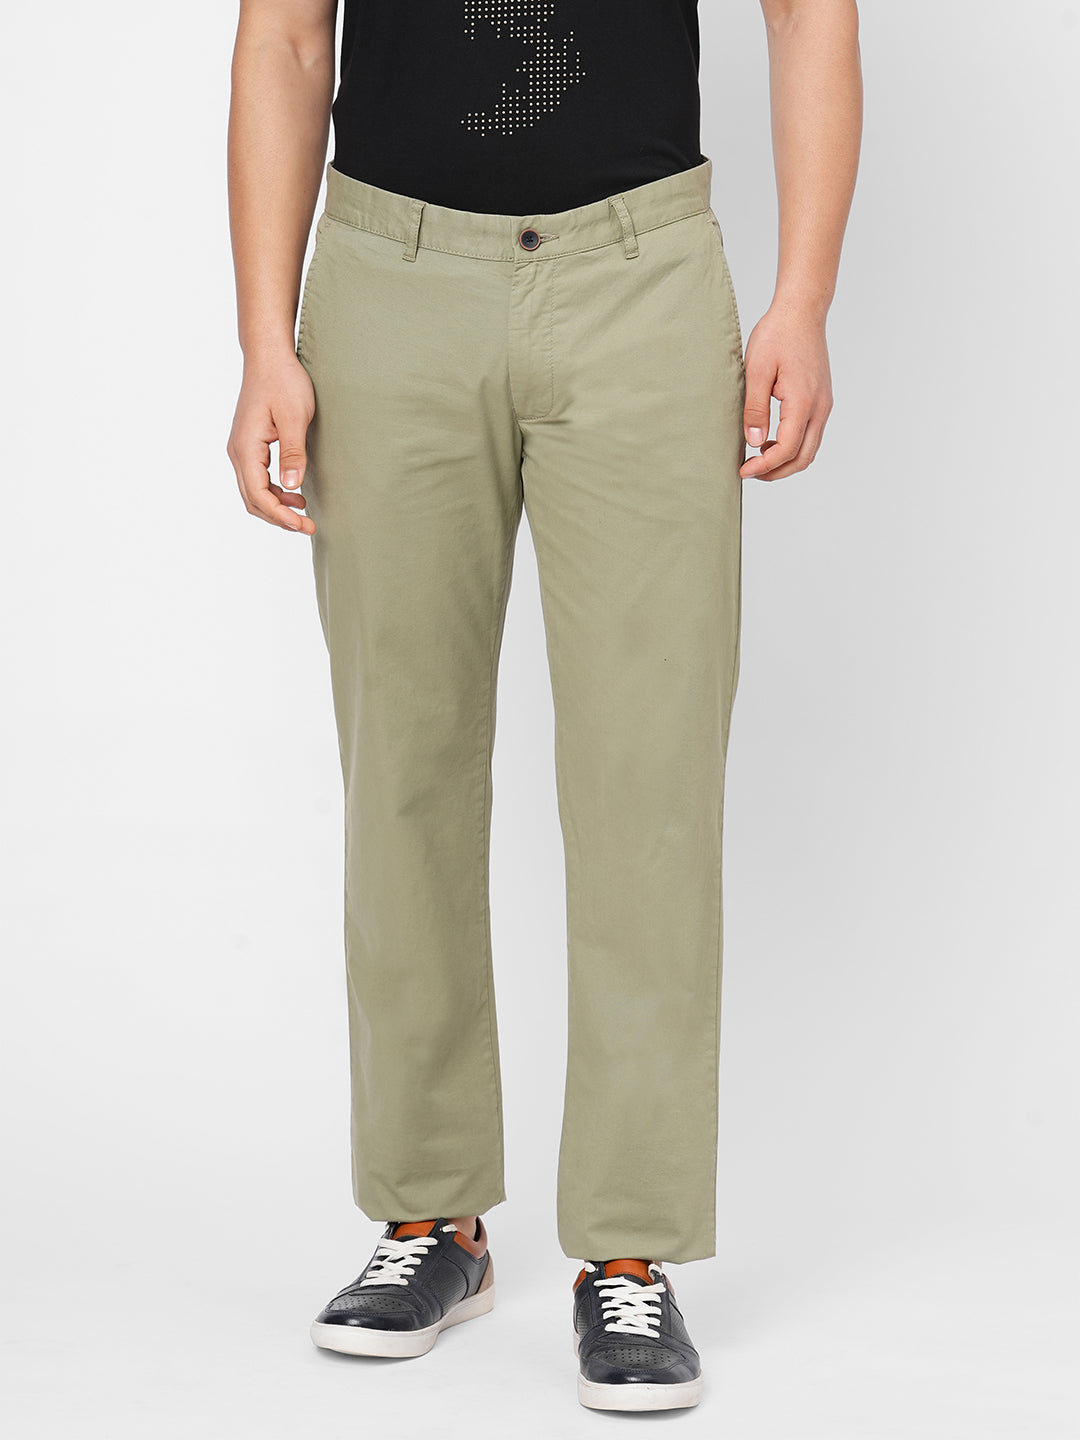 H&M+ Pull-on linen trousers - Khaki green - Ladies | H&M IN